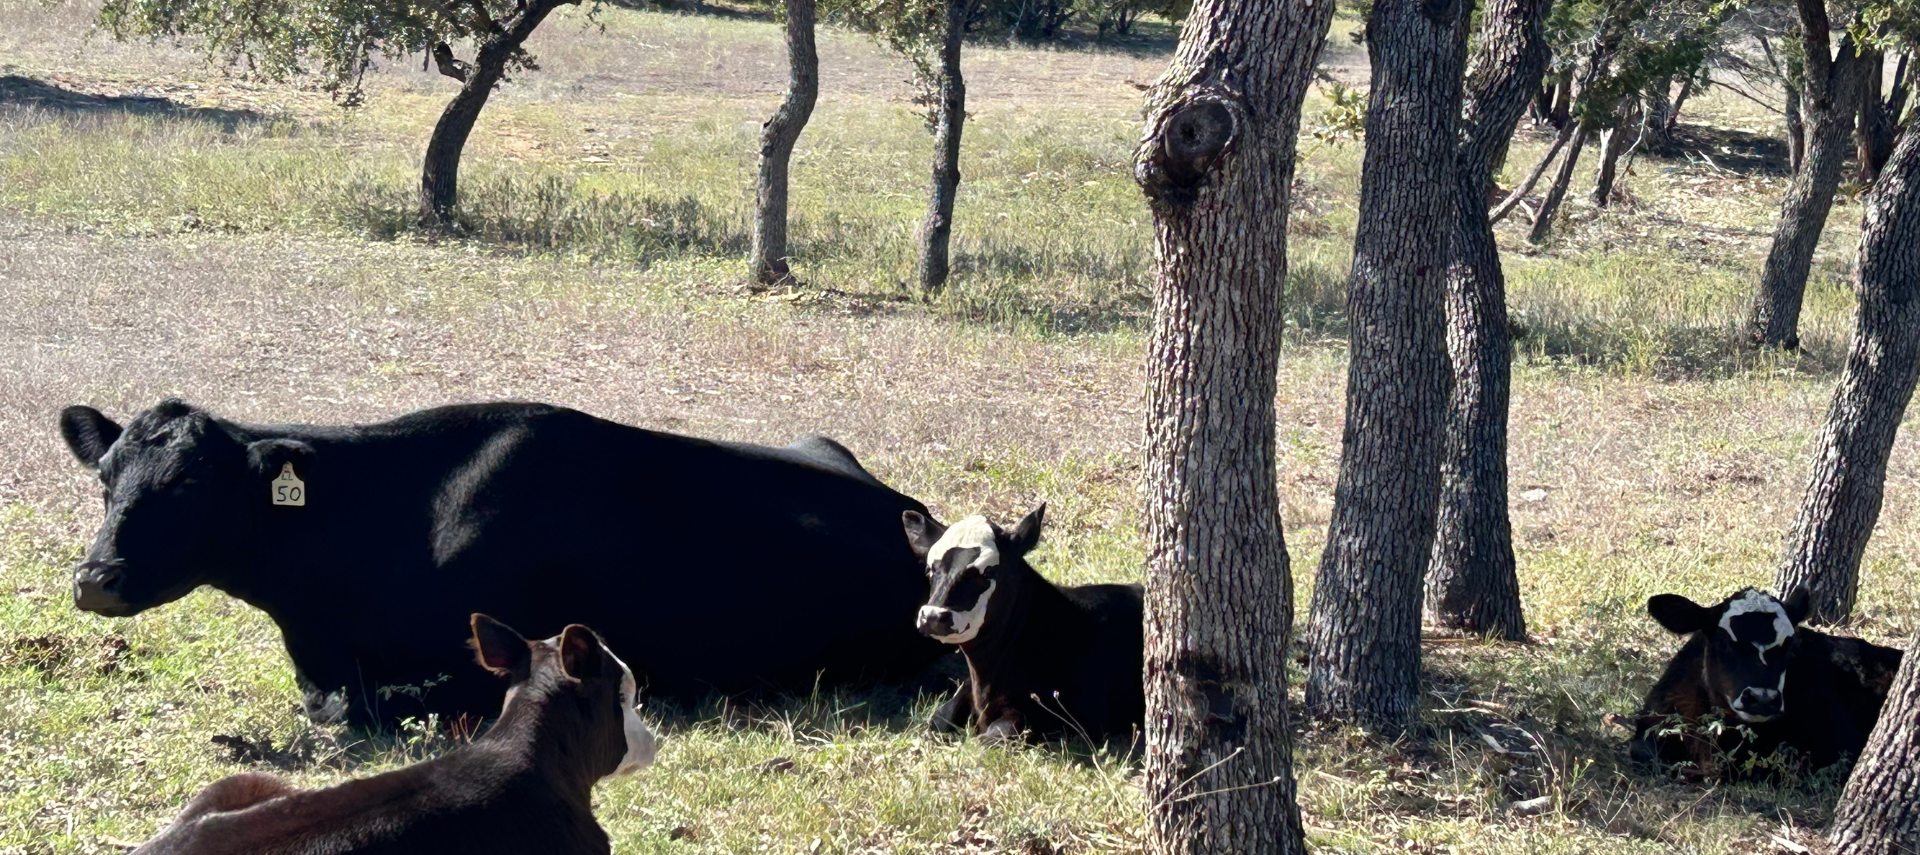 Image of cows on the ranch at Inn at sunset mill ranch wimberley texas